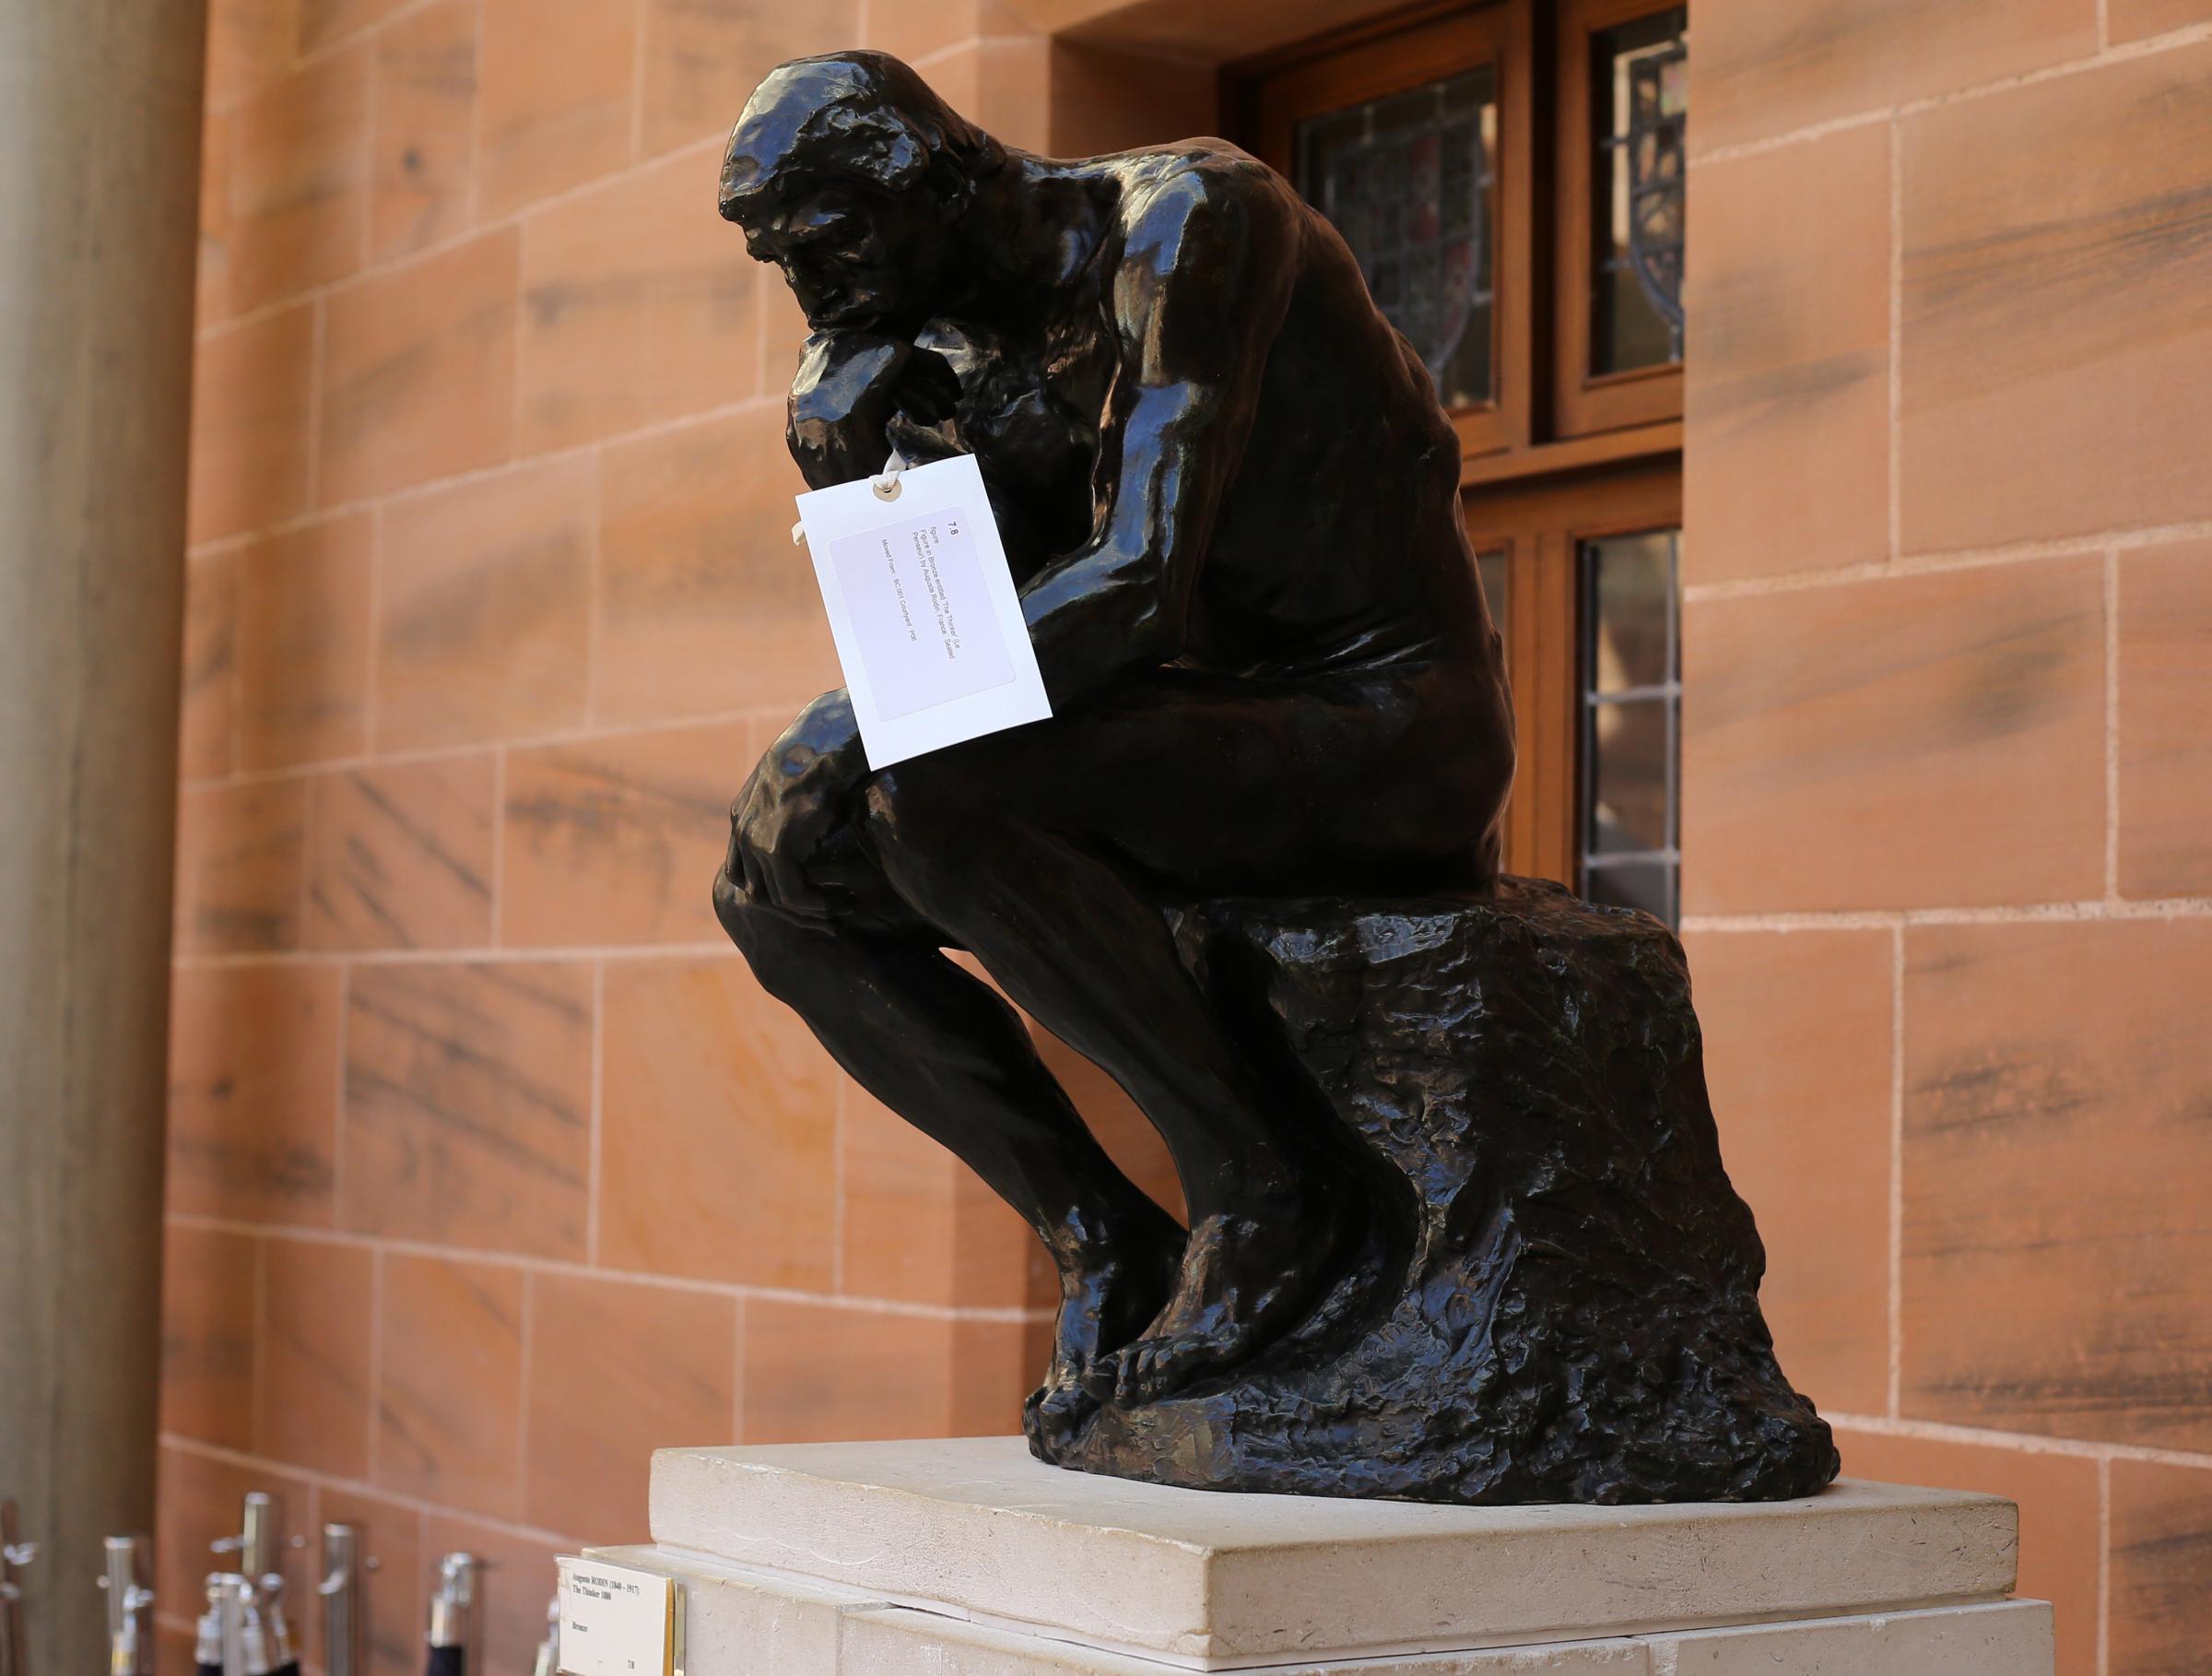 Contents of the Burrell collection were decanted, including The Thinker by Rodin, ahead of its refurbishment. Photograph by Colin Mearns.